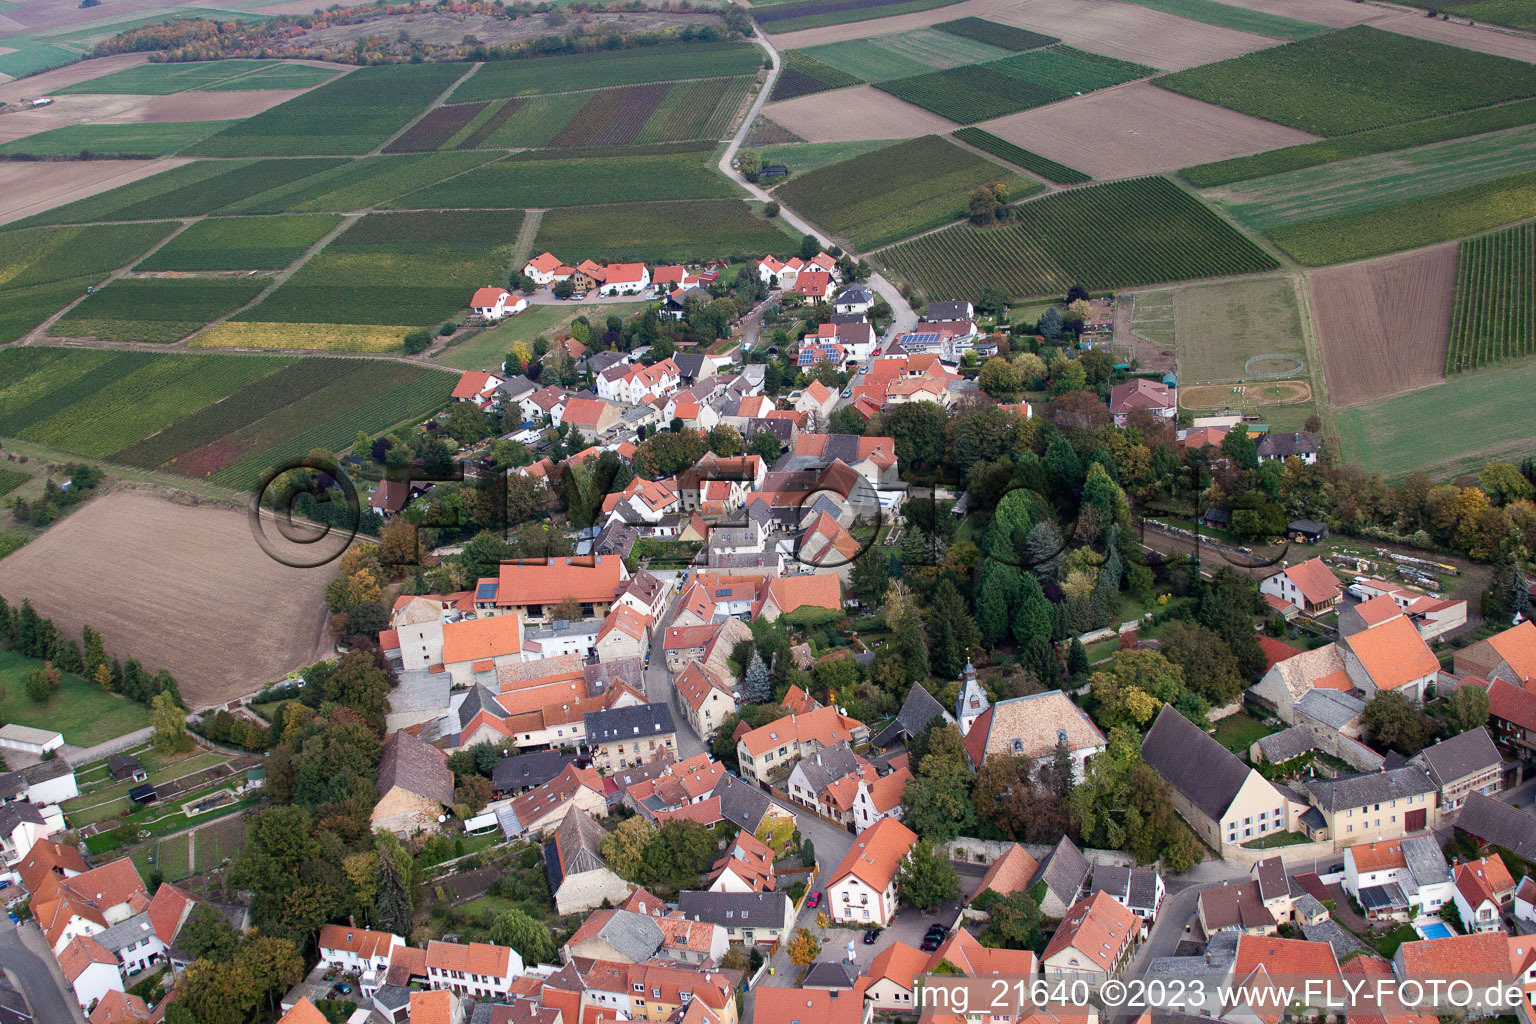 Eppelsheim in the state Rhineland-Palatinate, Germany seen from above